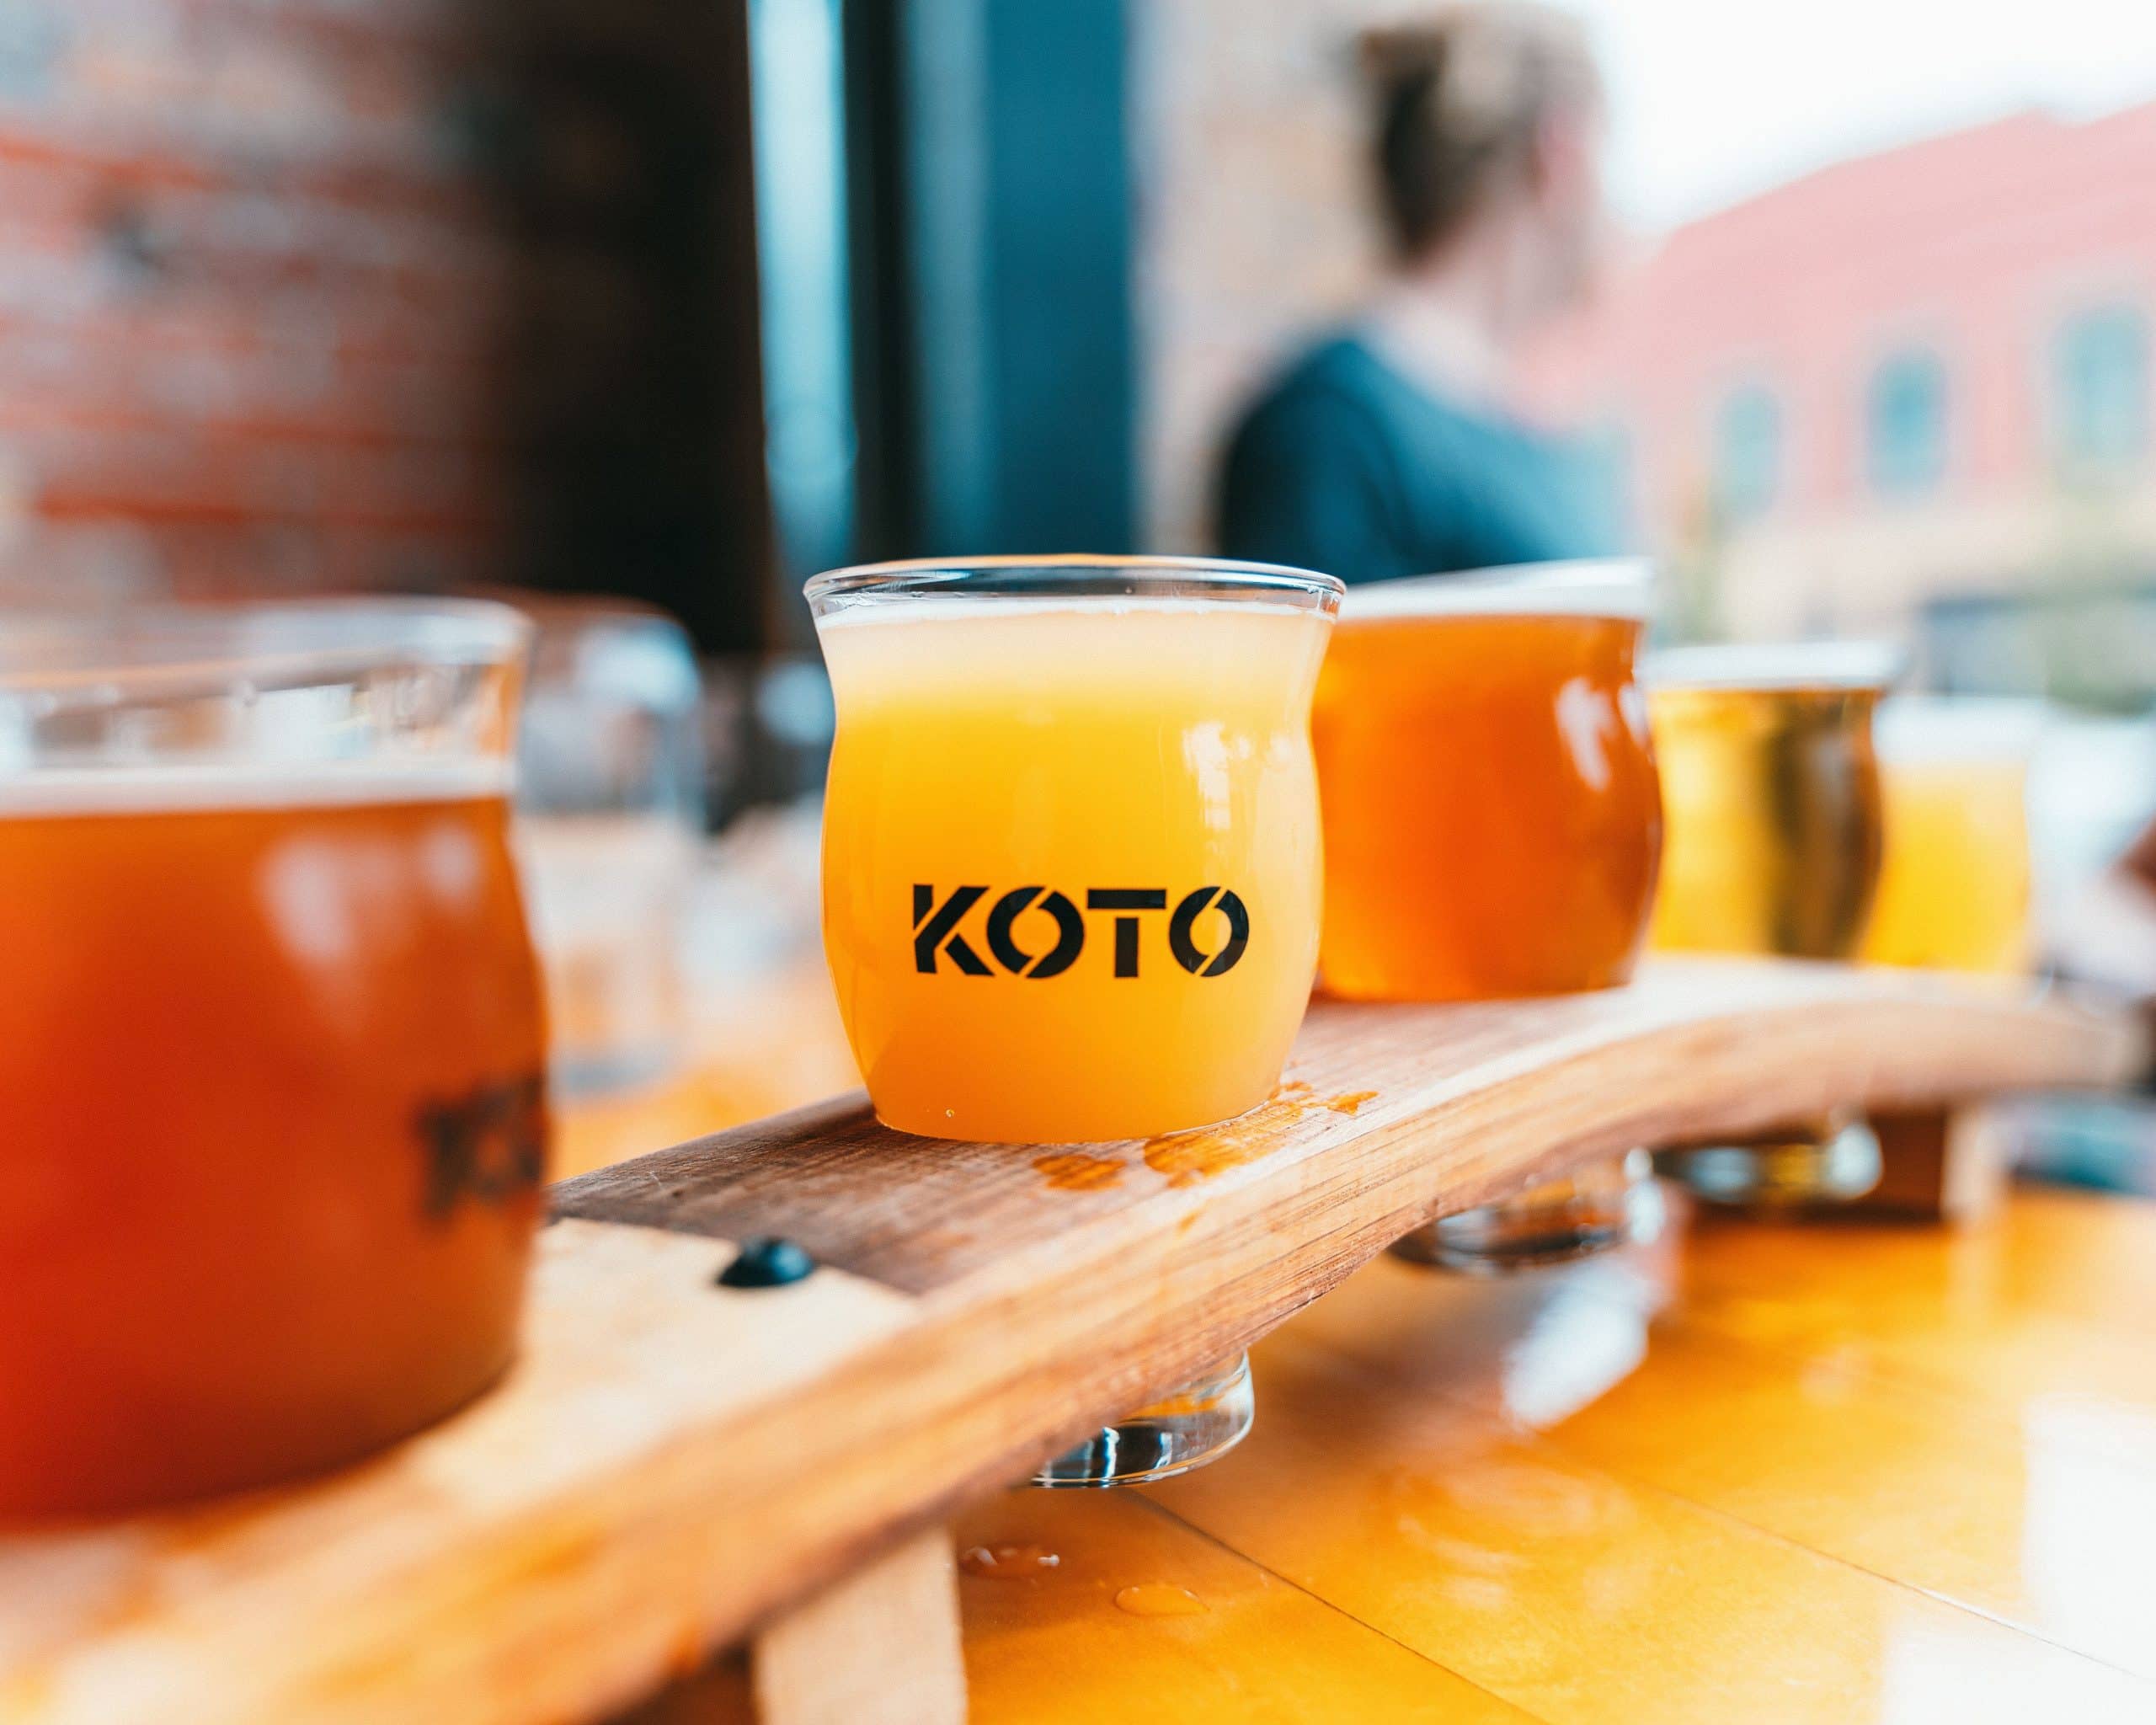 A flight of different beers from Koto Brewing Company.